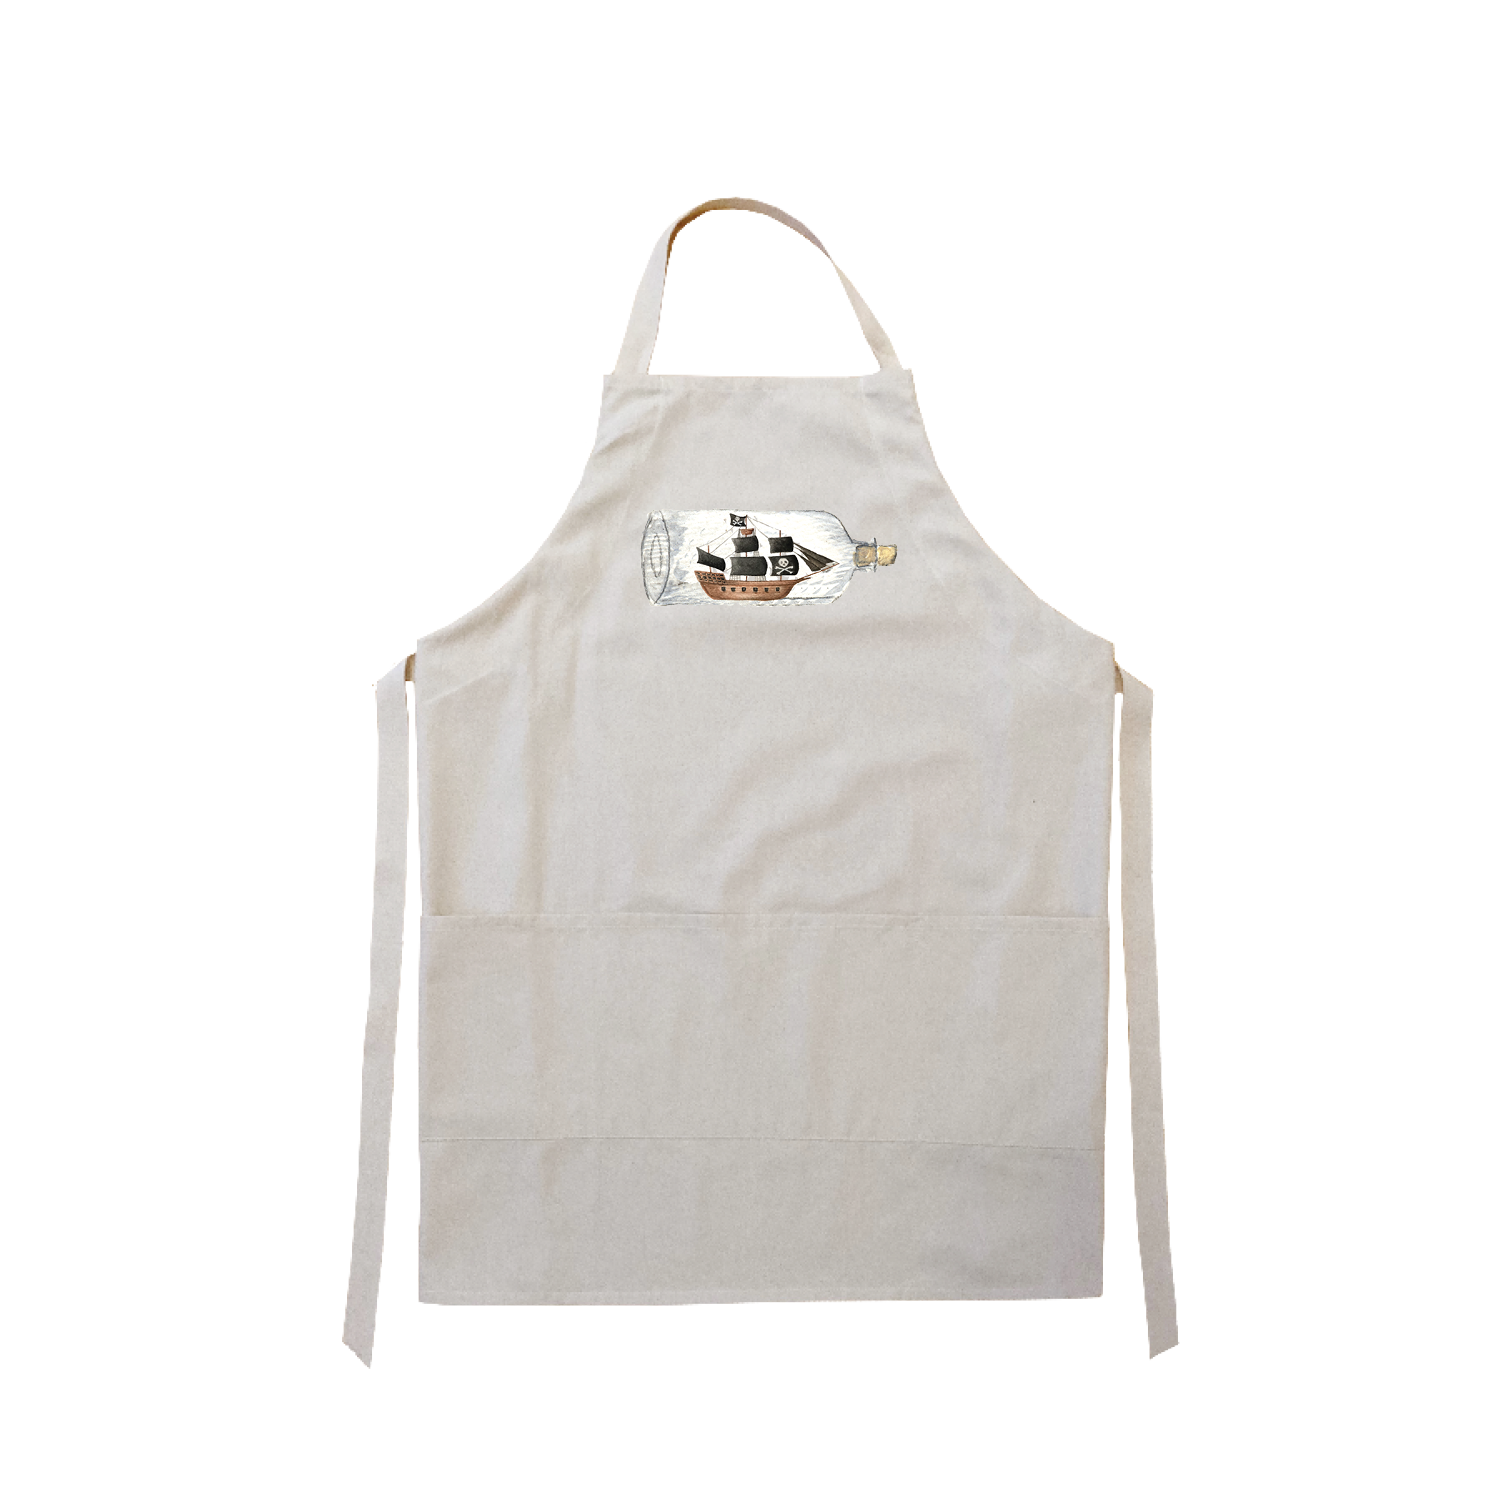 pirate ship in a bottle apron